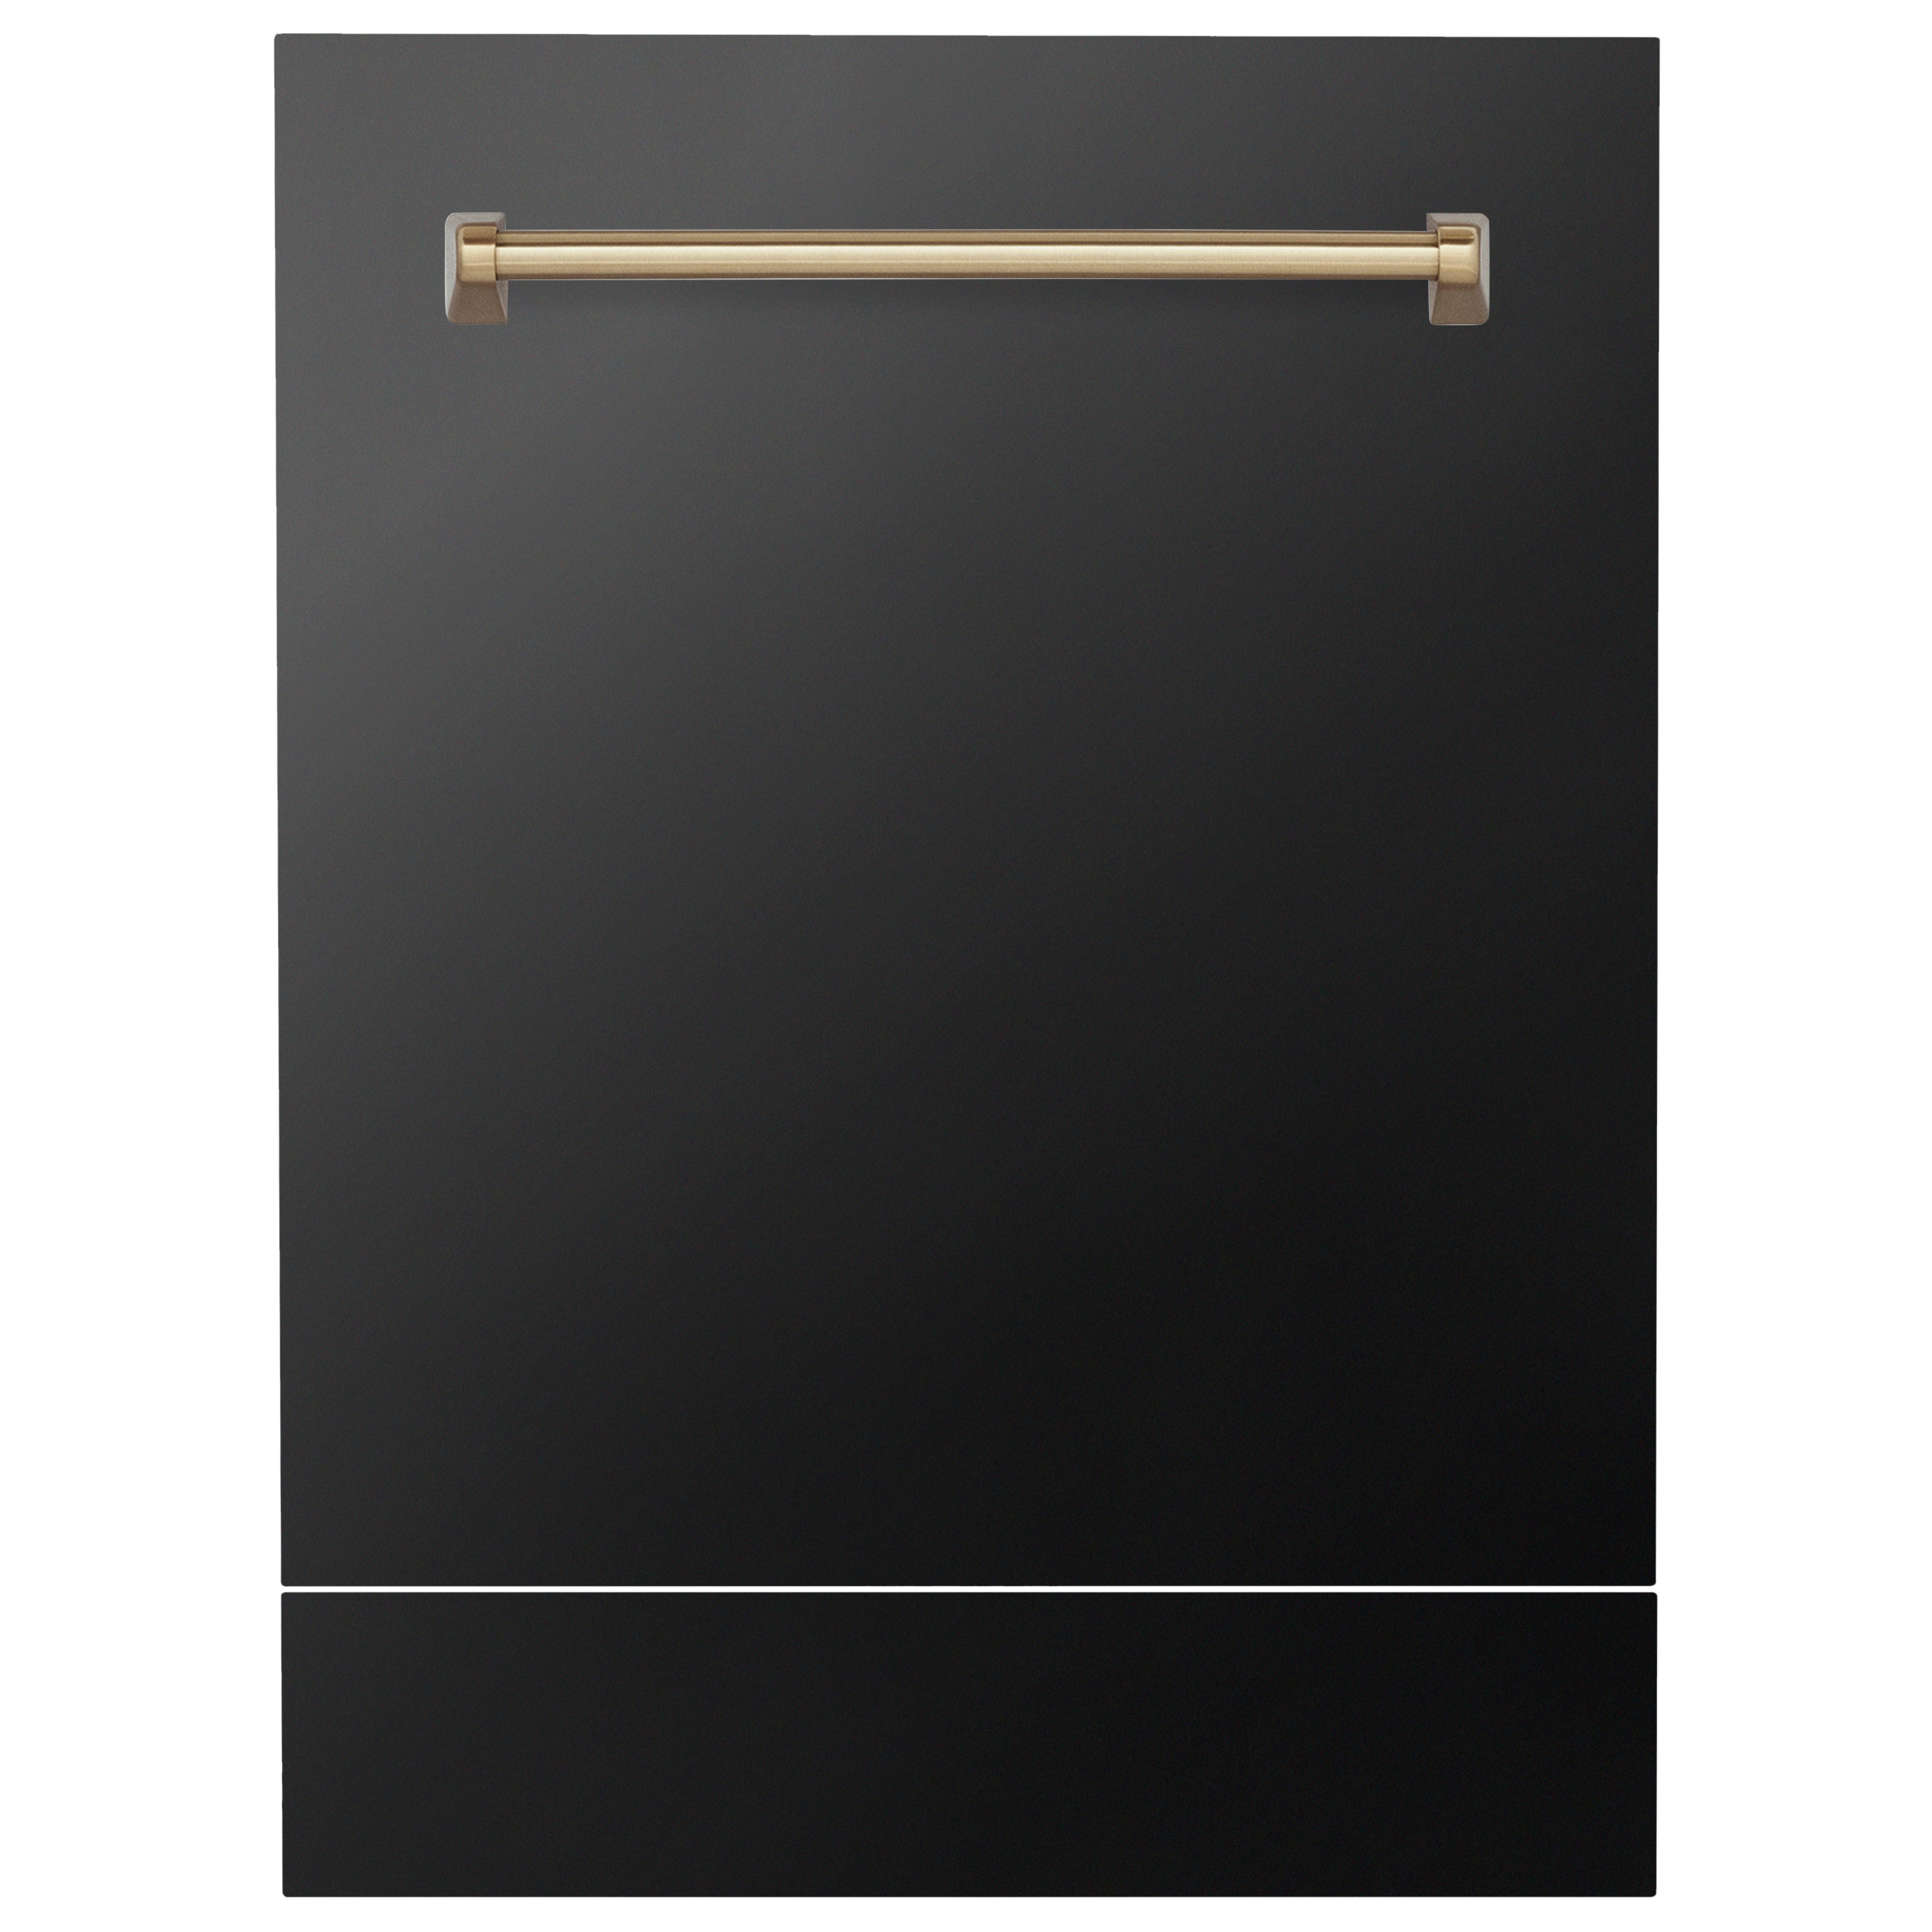 ZLINE 24" Autograph Edition Tallac Dishwasher Panel in Black Stainless Steel with Champagne Bronze Handle (DPVZ-BS-24-CB)